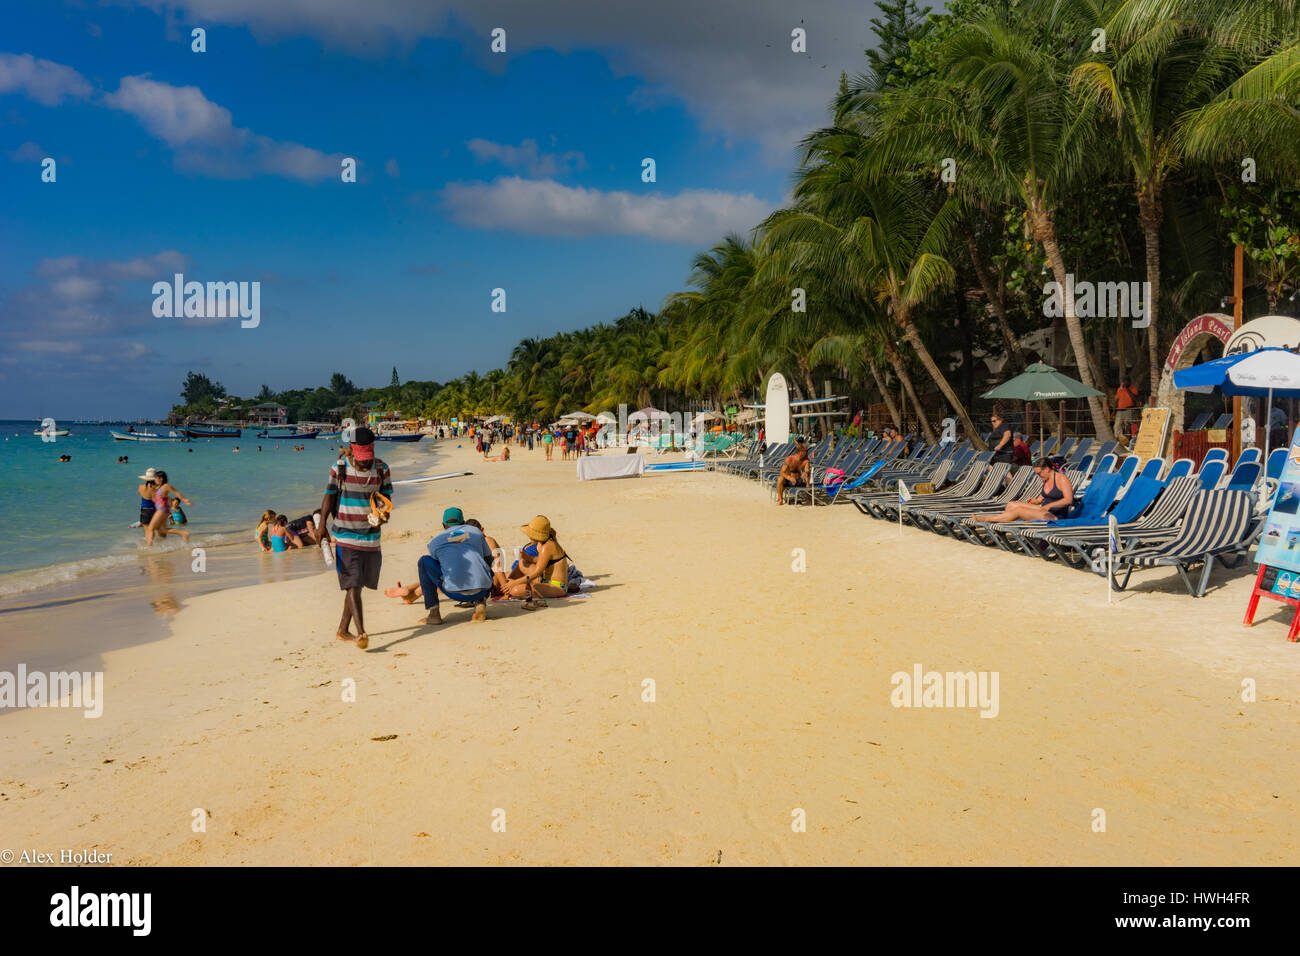 Central American beach front Stock Photo